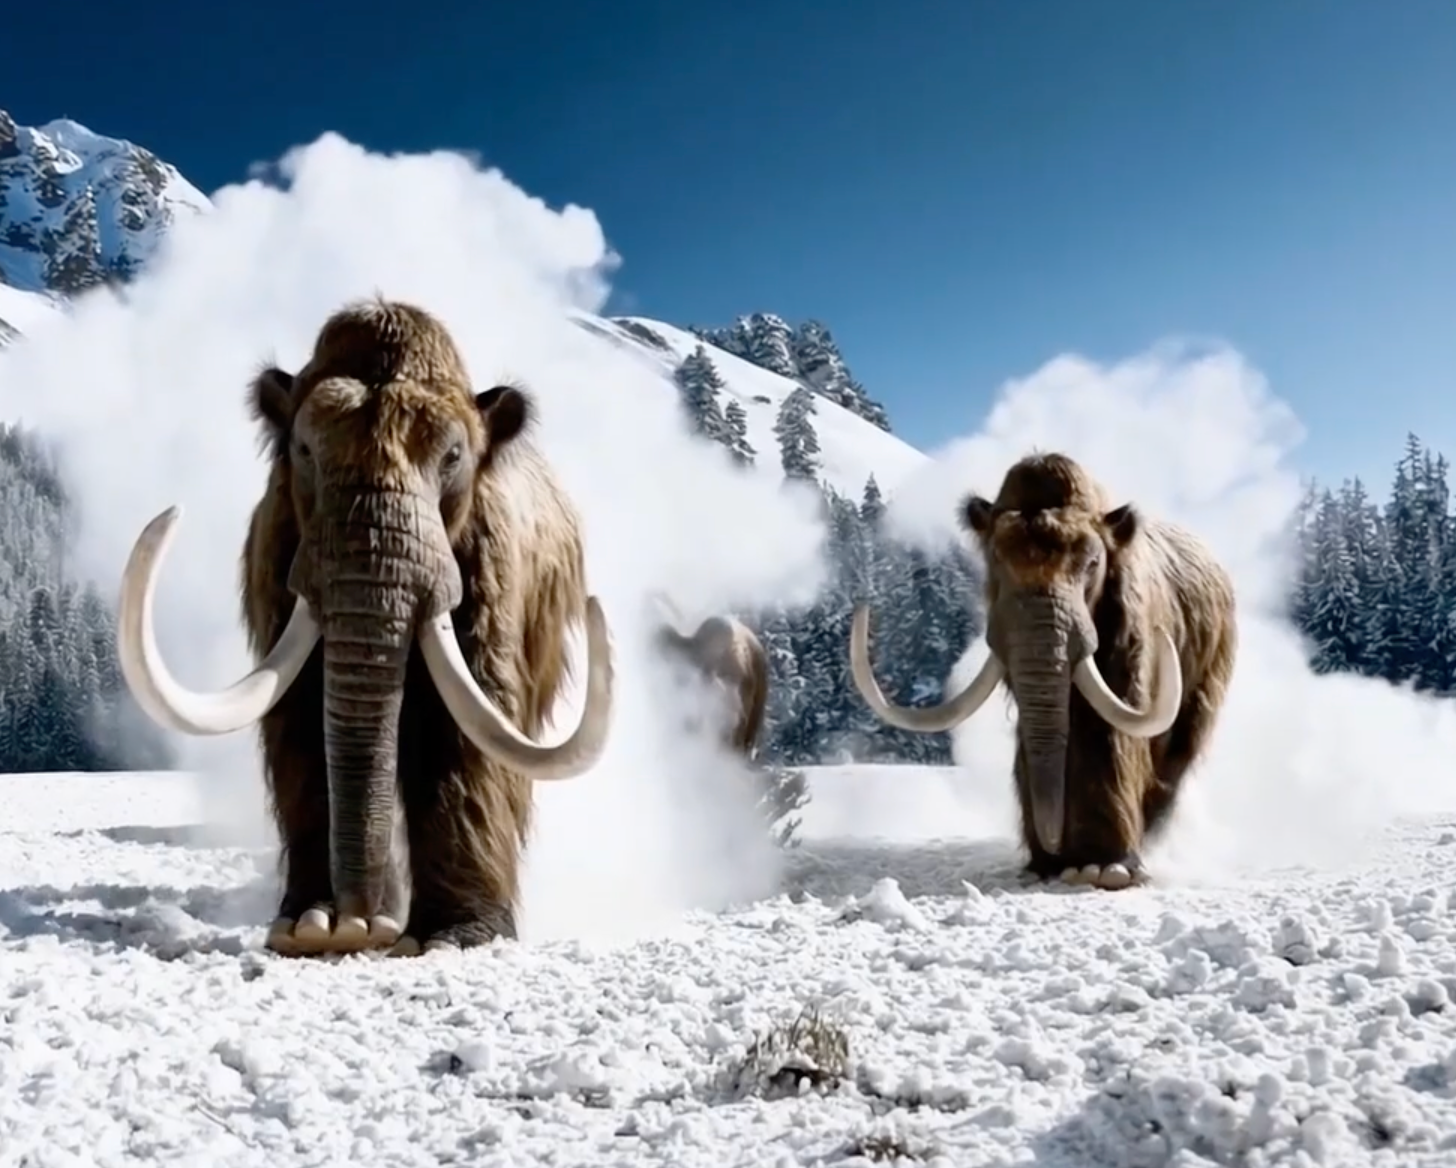 Giant mammoths in the snow